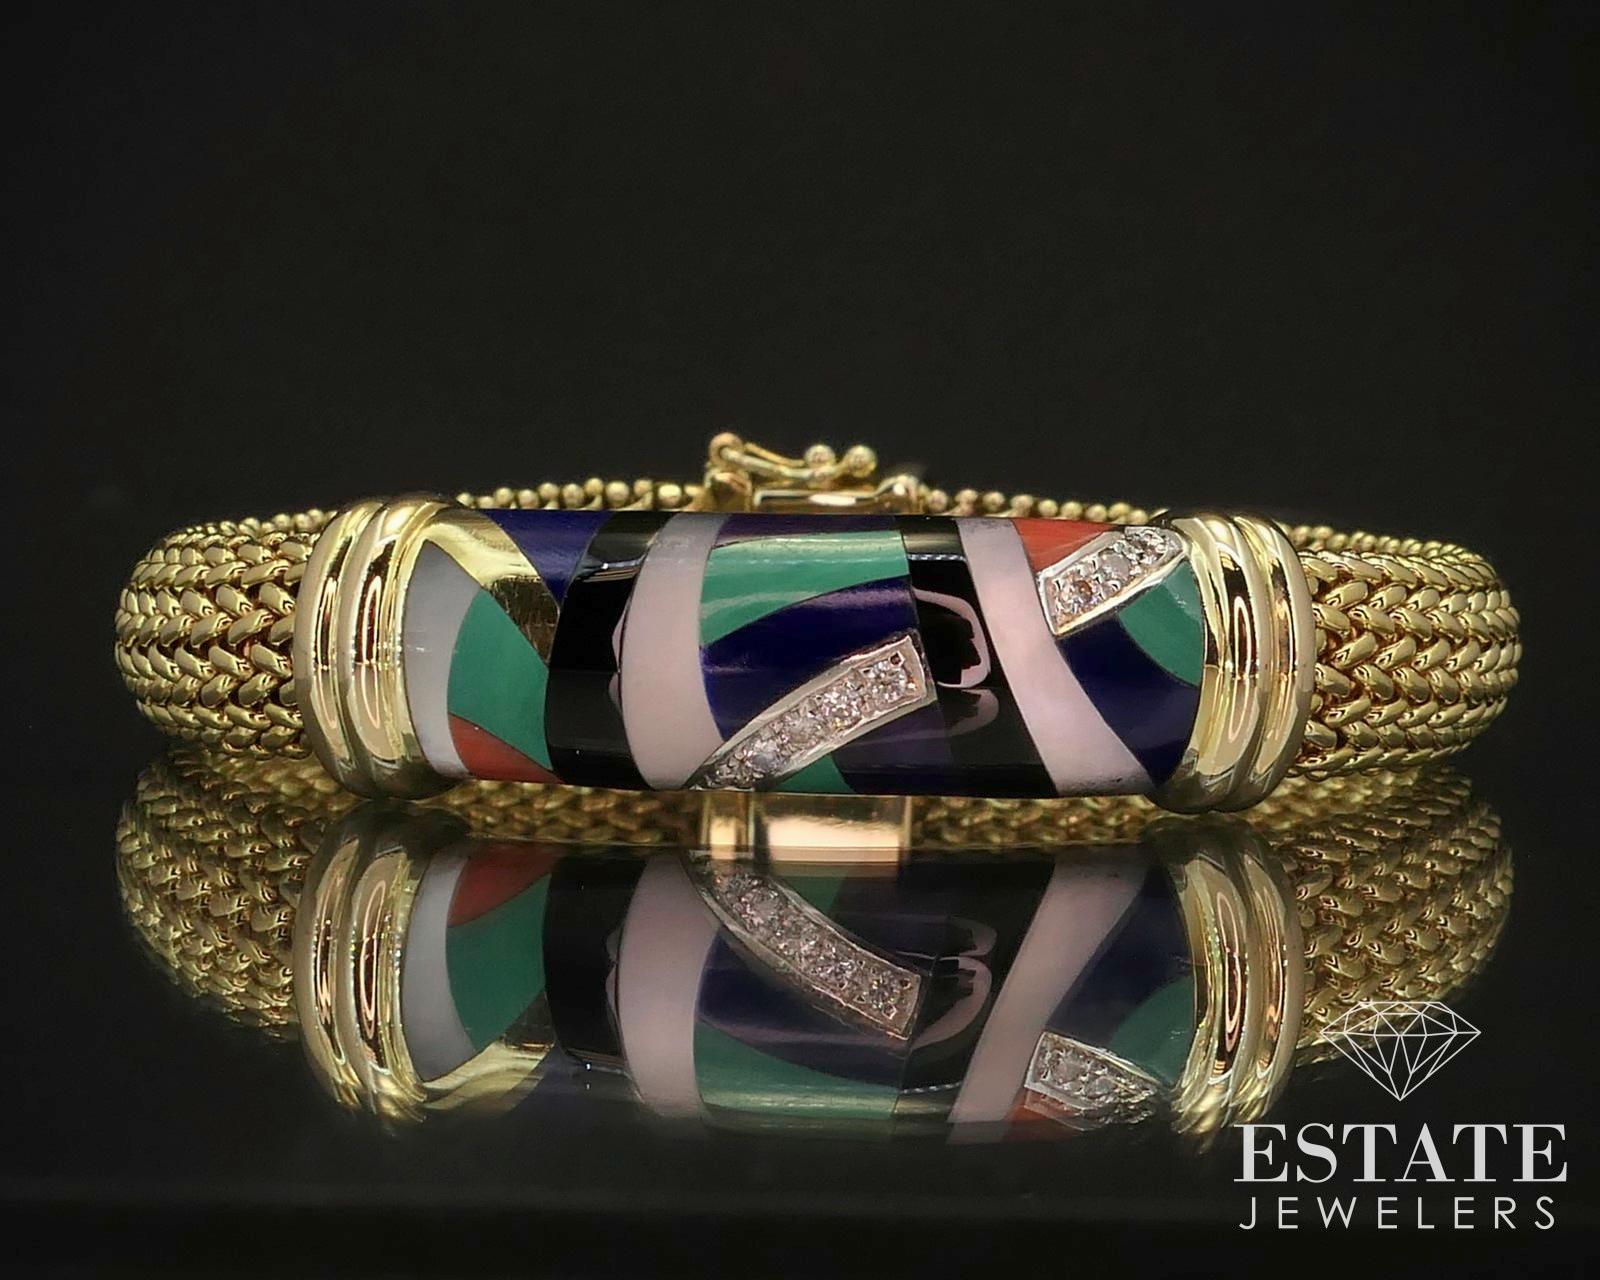 Stunning genuine Asch Grossbardt piece with inlaid mother of pearl, malachite, lapis, coral and black onyx with diamond accents. Approximately .12ctw of diamonds with VS2 clarity and G color. 7